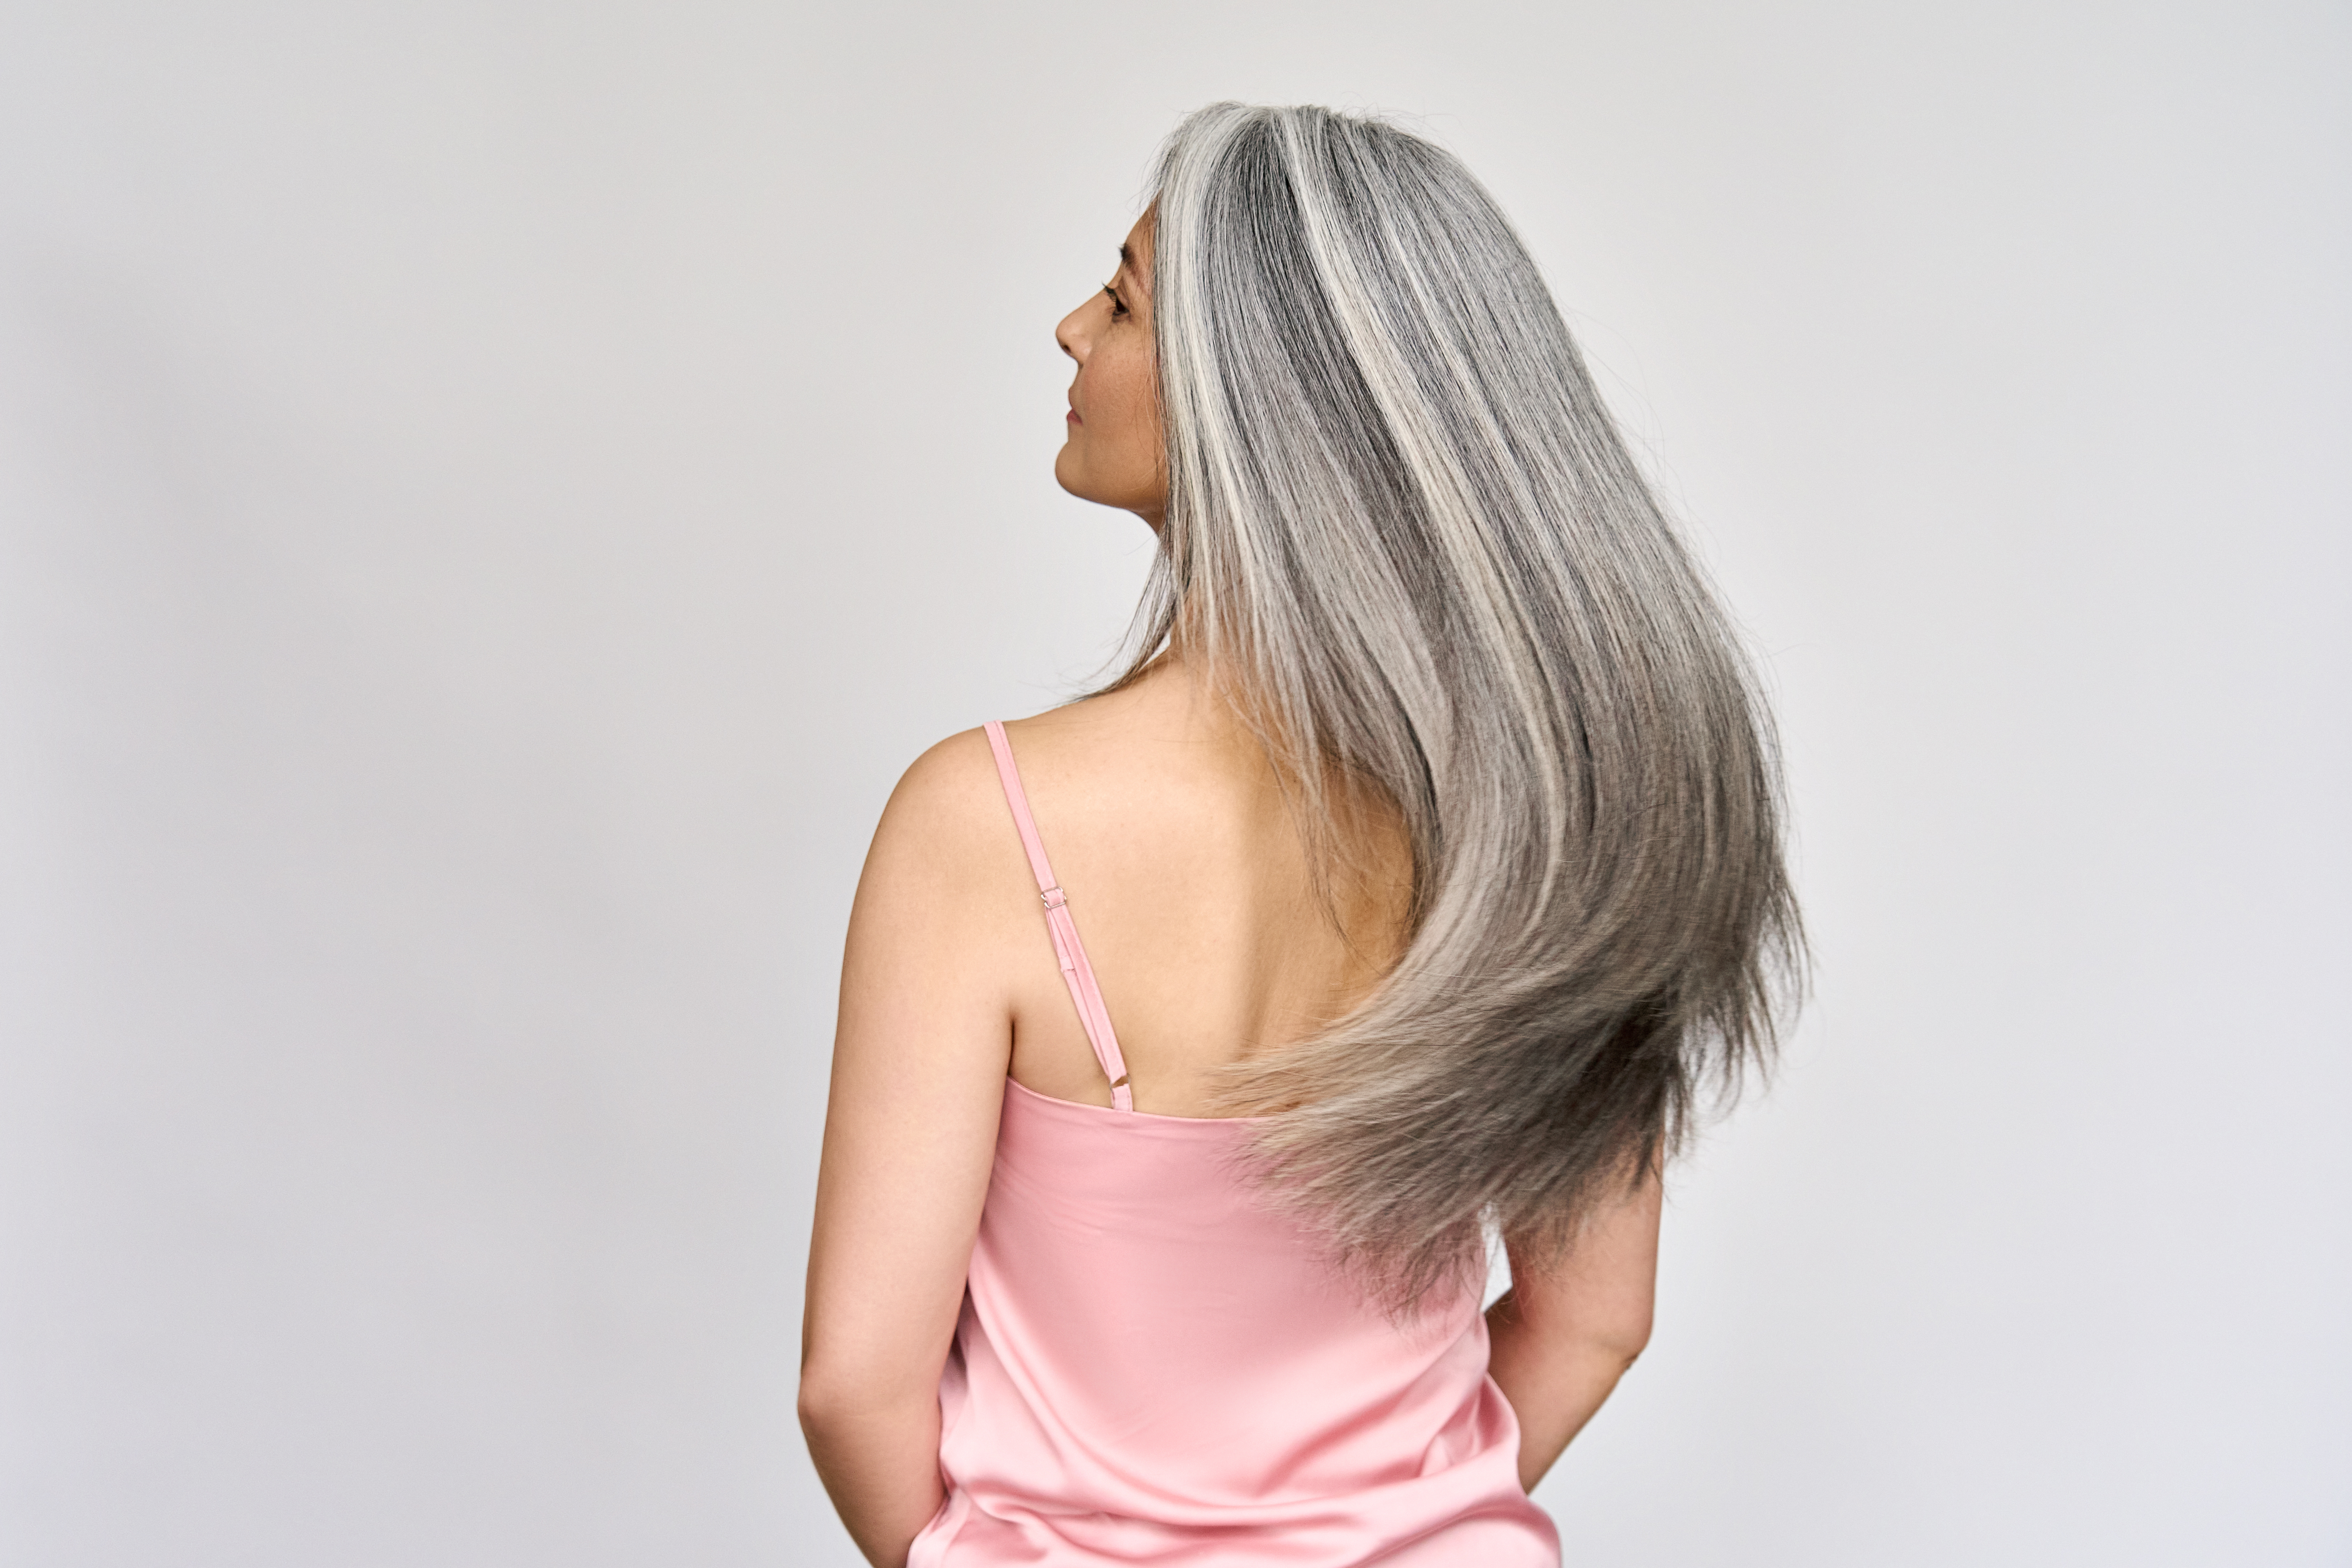 A woman with long gray hair shaking her head | Source: Shutterstock